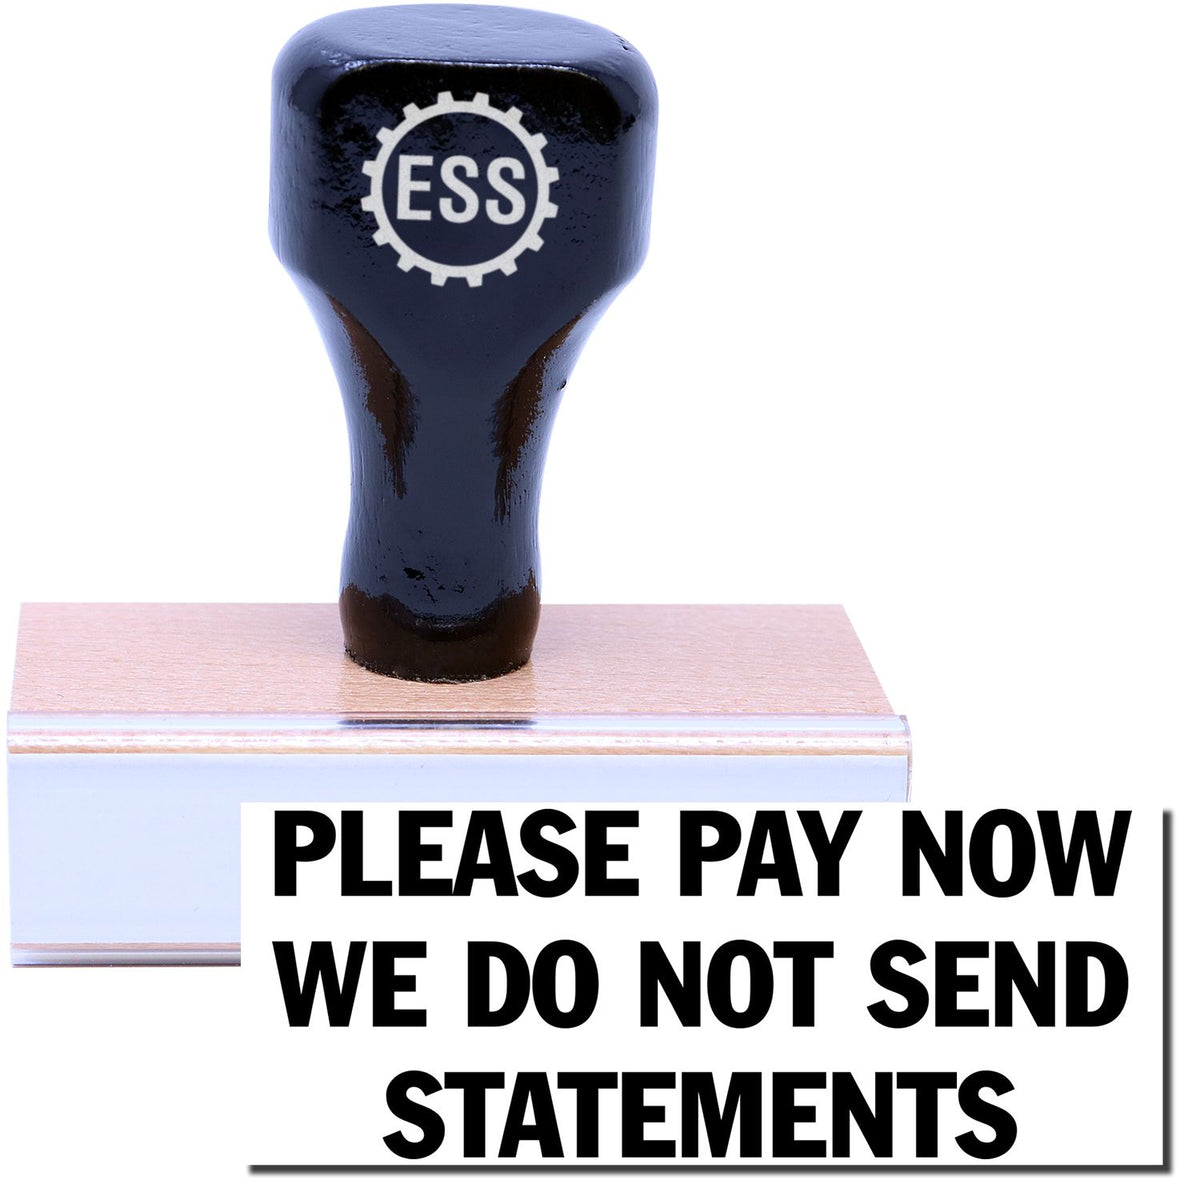 A stock office rubber stamp with a stamped image showing how the text &quot;PLEASE PAY NOW WE DO NOT SEND STATEMENTS&quot; is displayed after stamping.